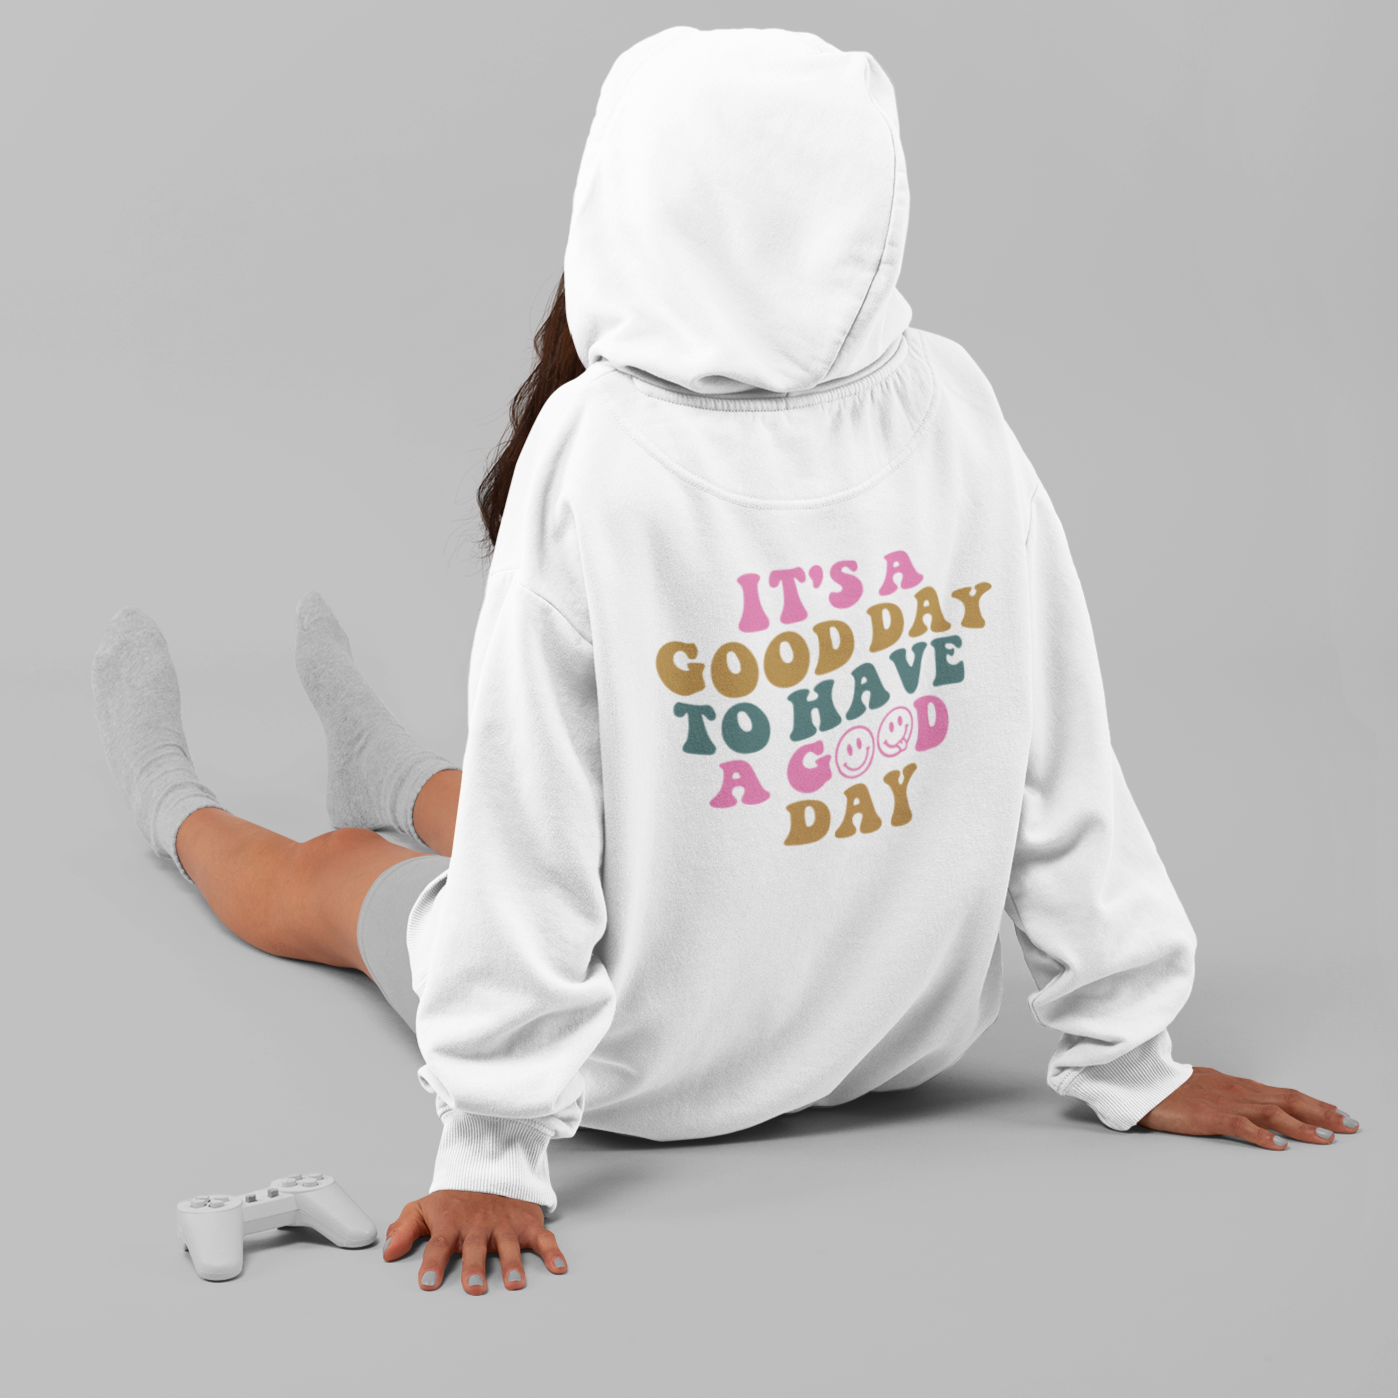 Its a Good Day  - Full Color Heat Transfer